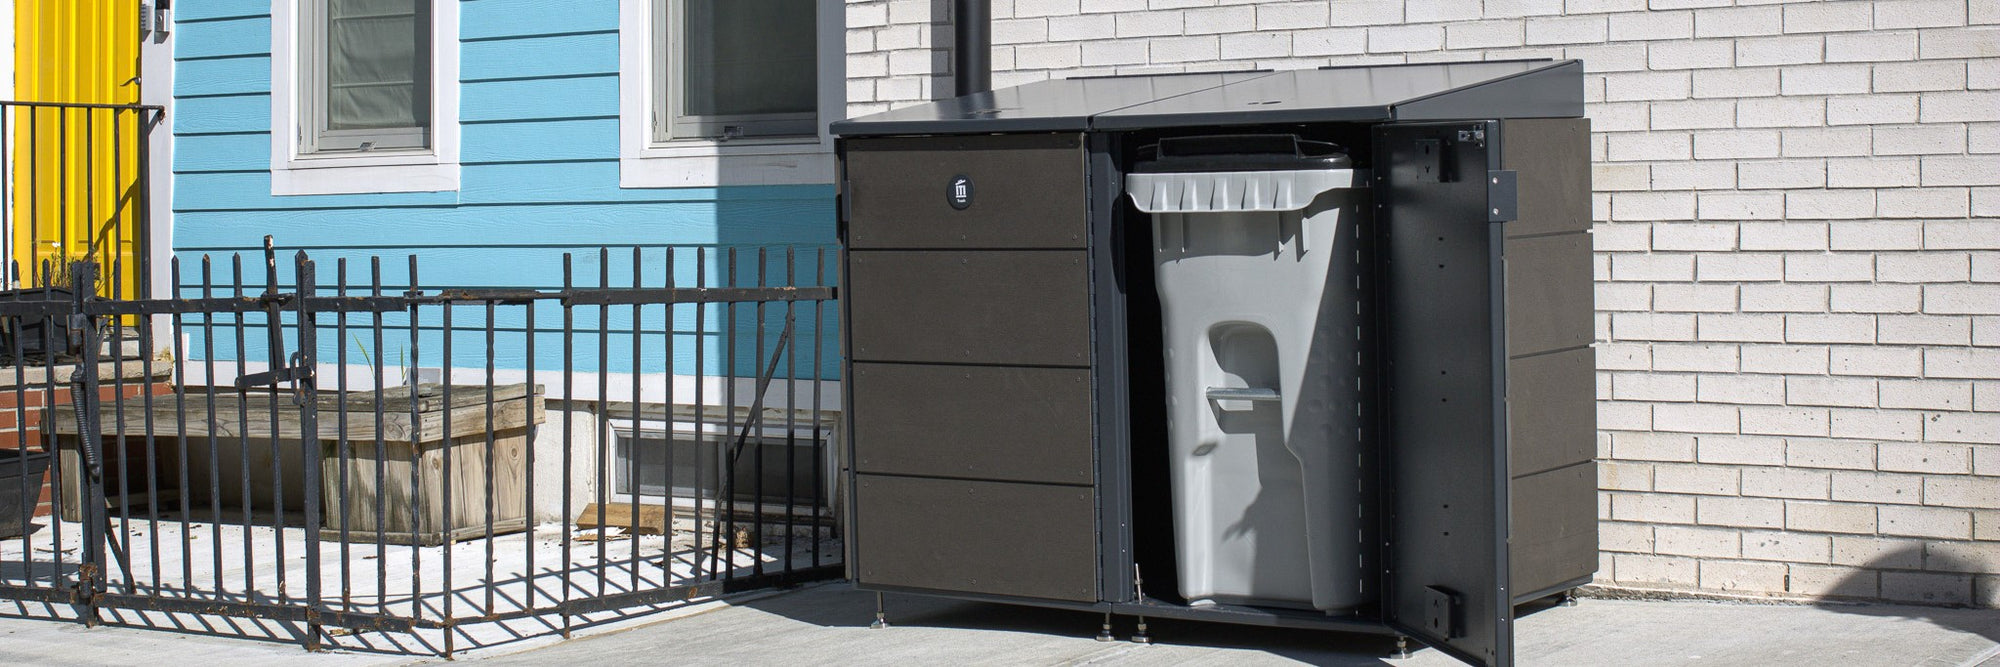 Medium citibin for new nyc trash can rules